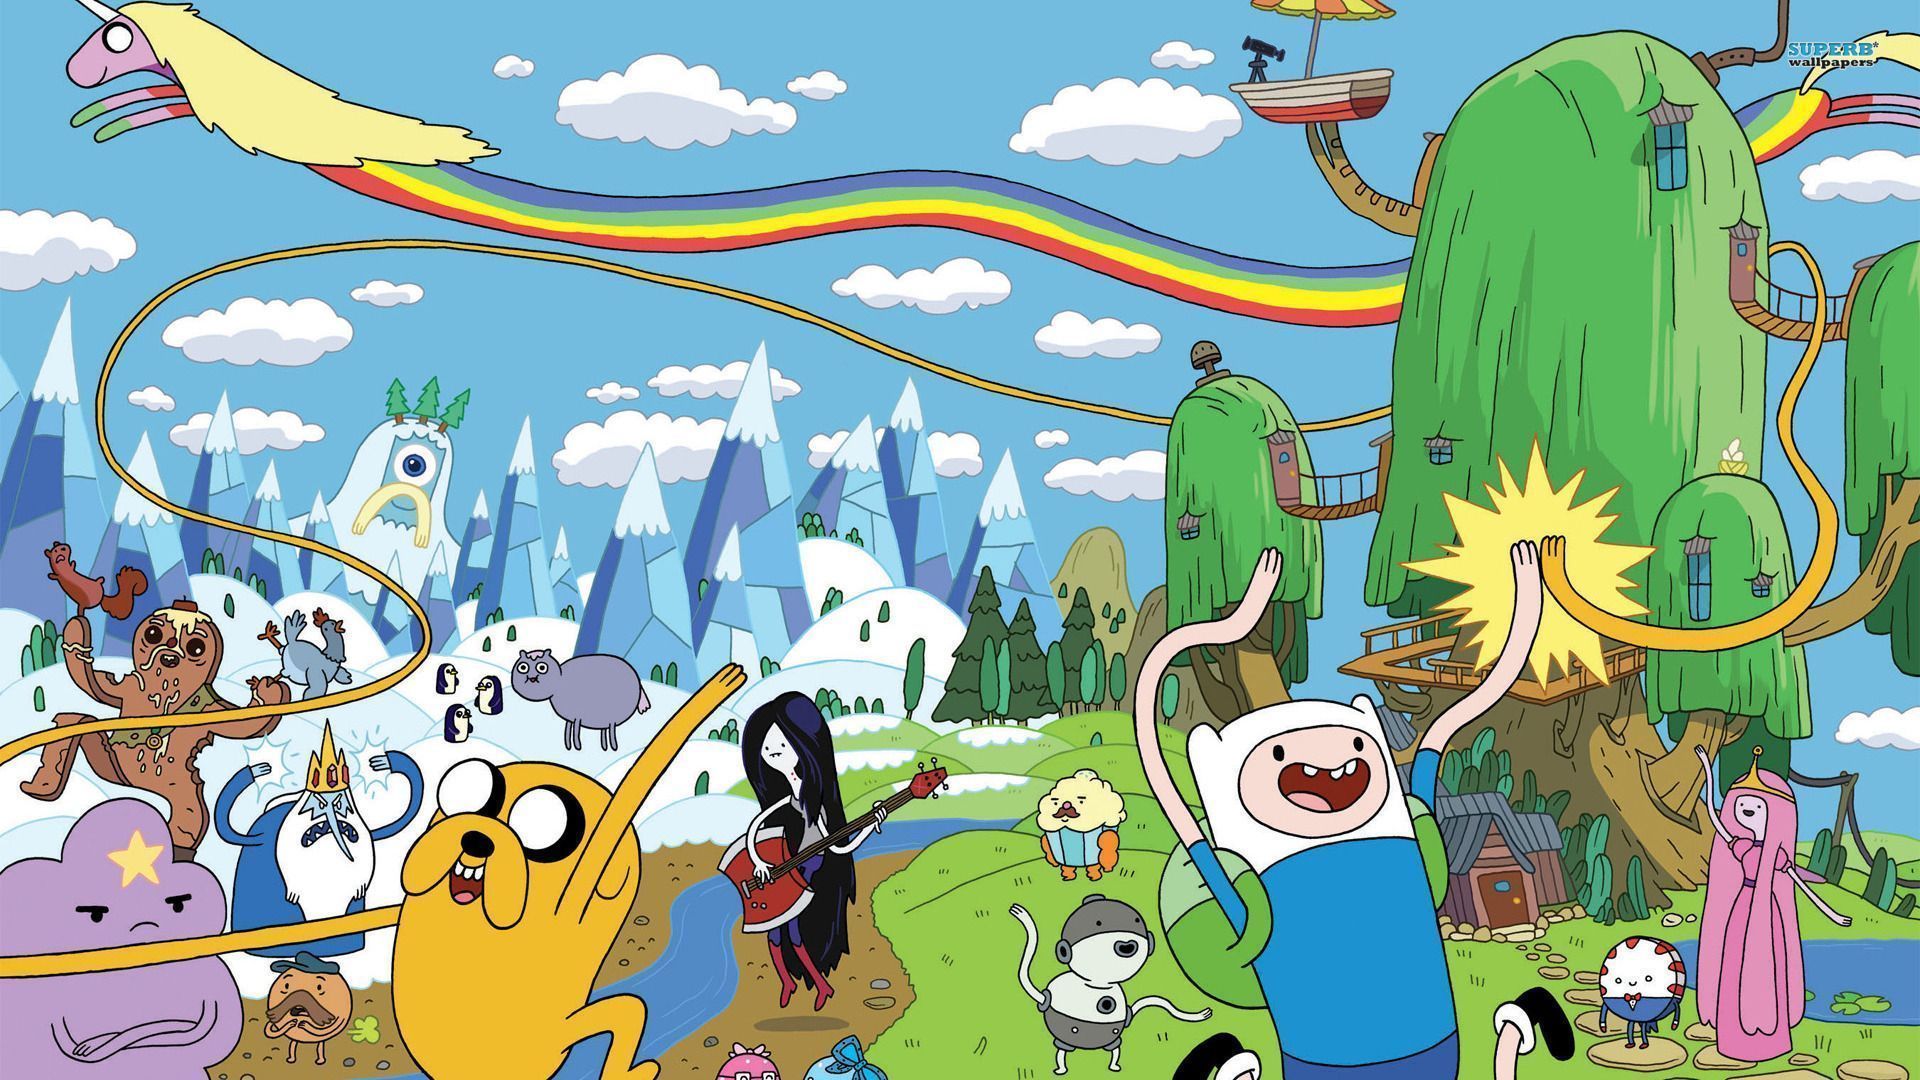  Finn and Jake playing on a rainbow in Adventure Time wallpaper  - Adventure Time